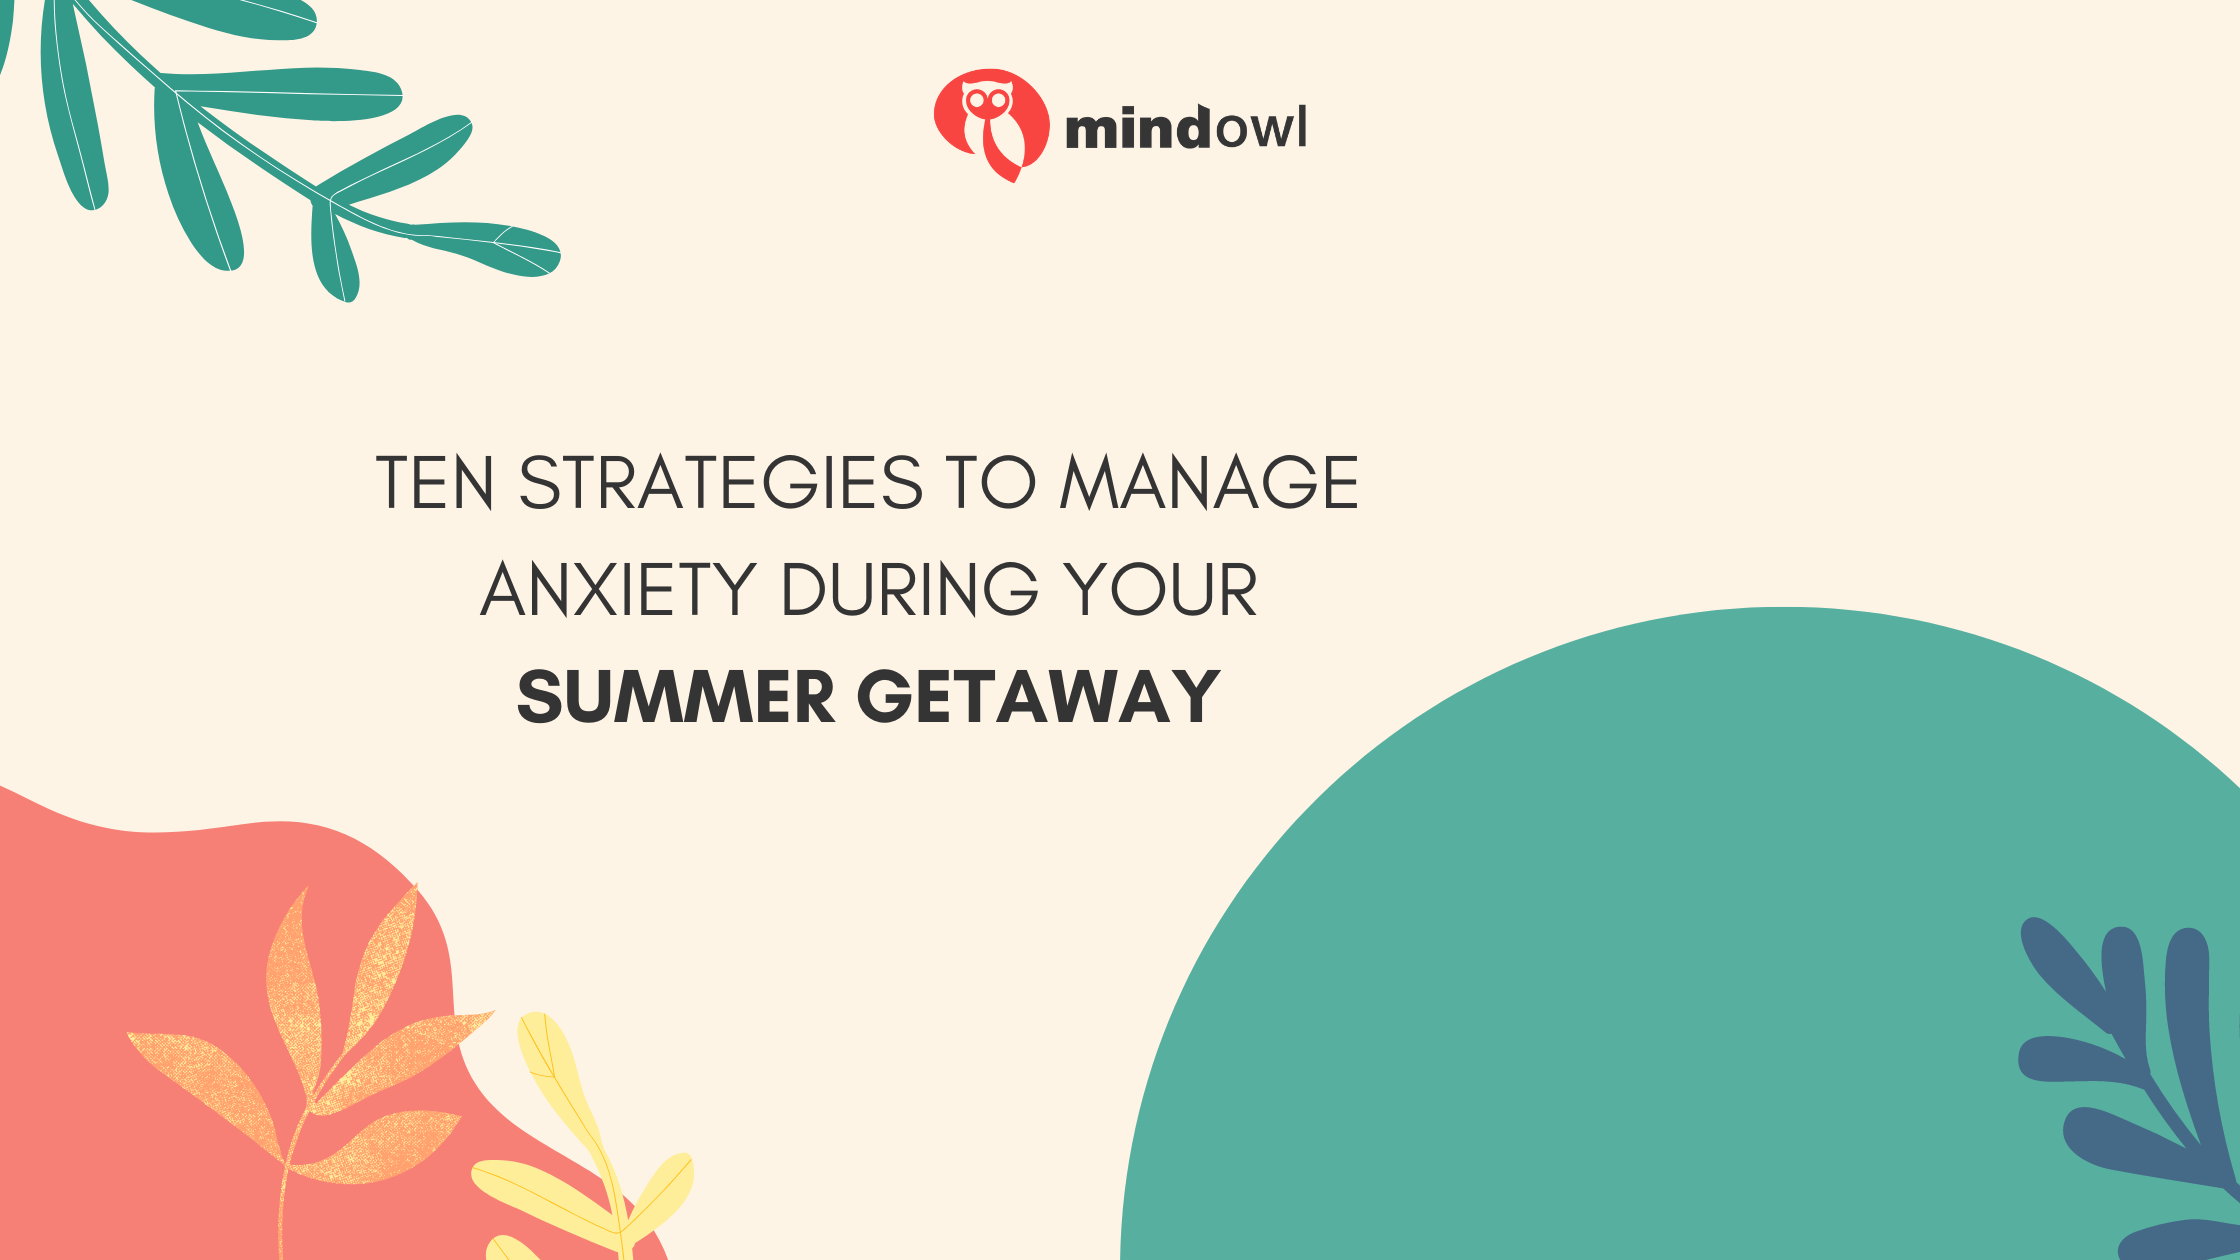 Ten strategies to manage anxiety during your summer getaway